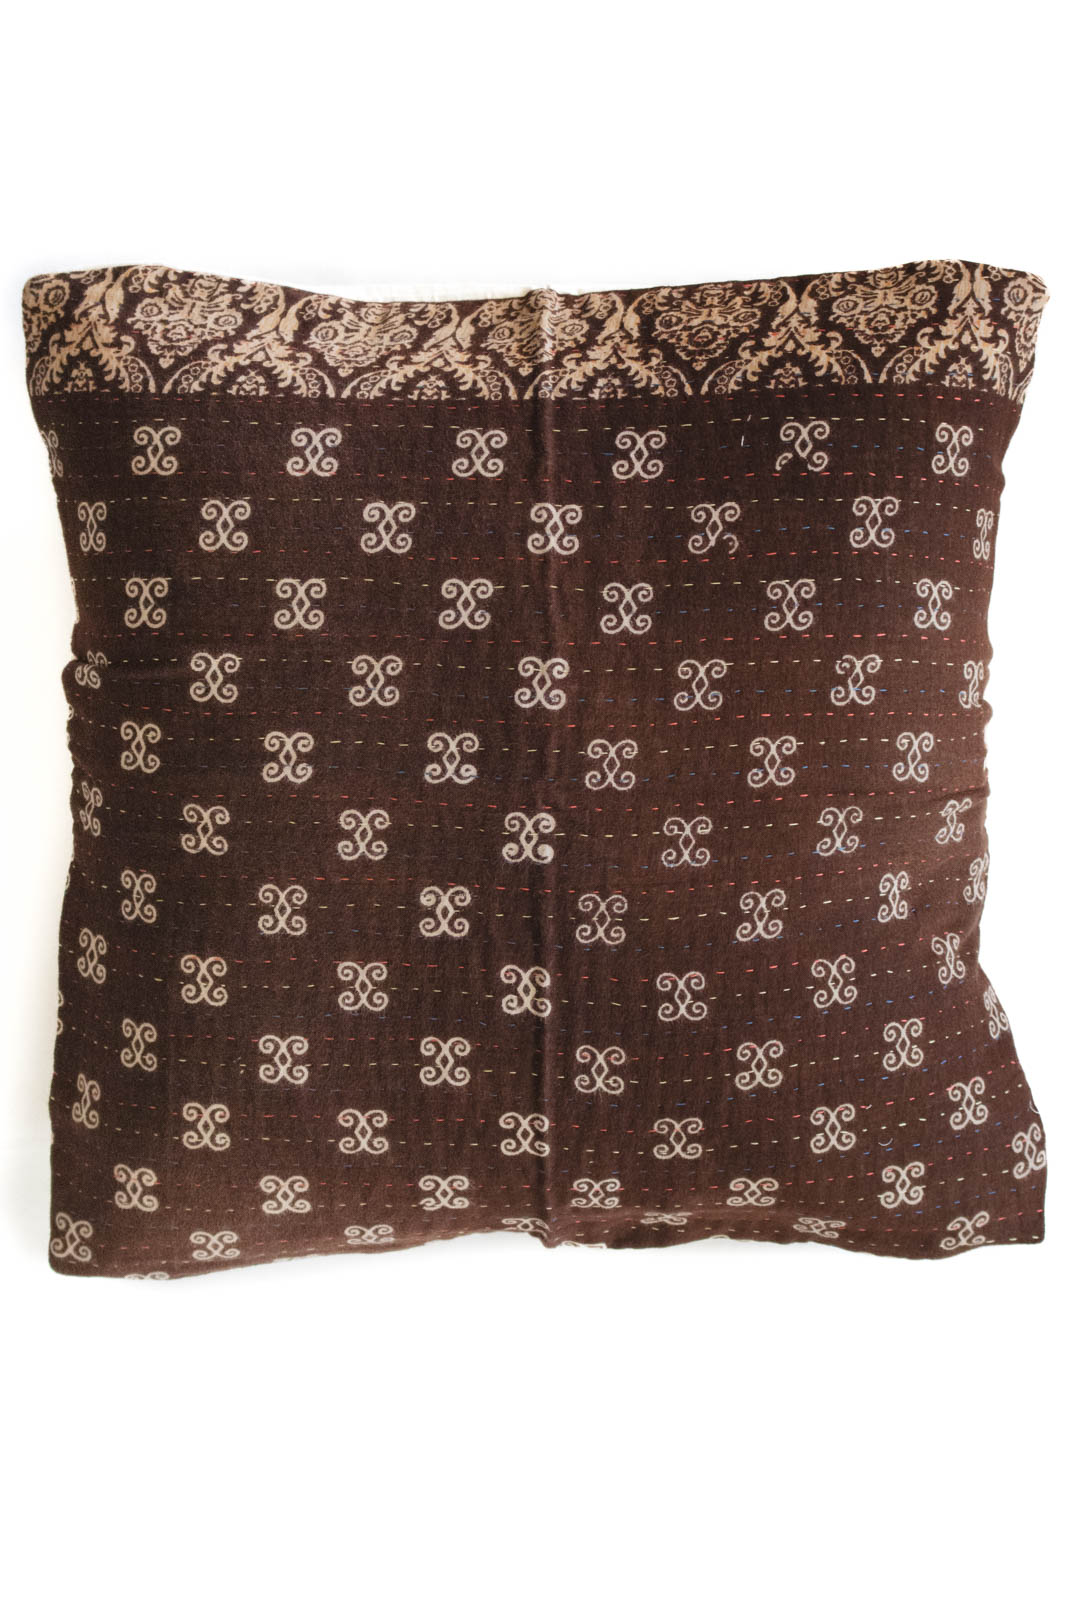 Fearless no. 6 Kantha Pillow Cover